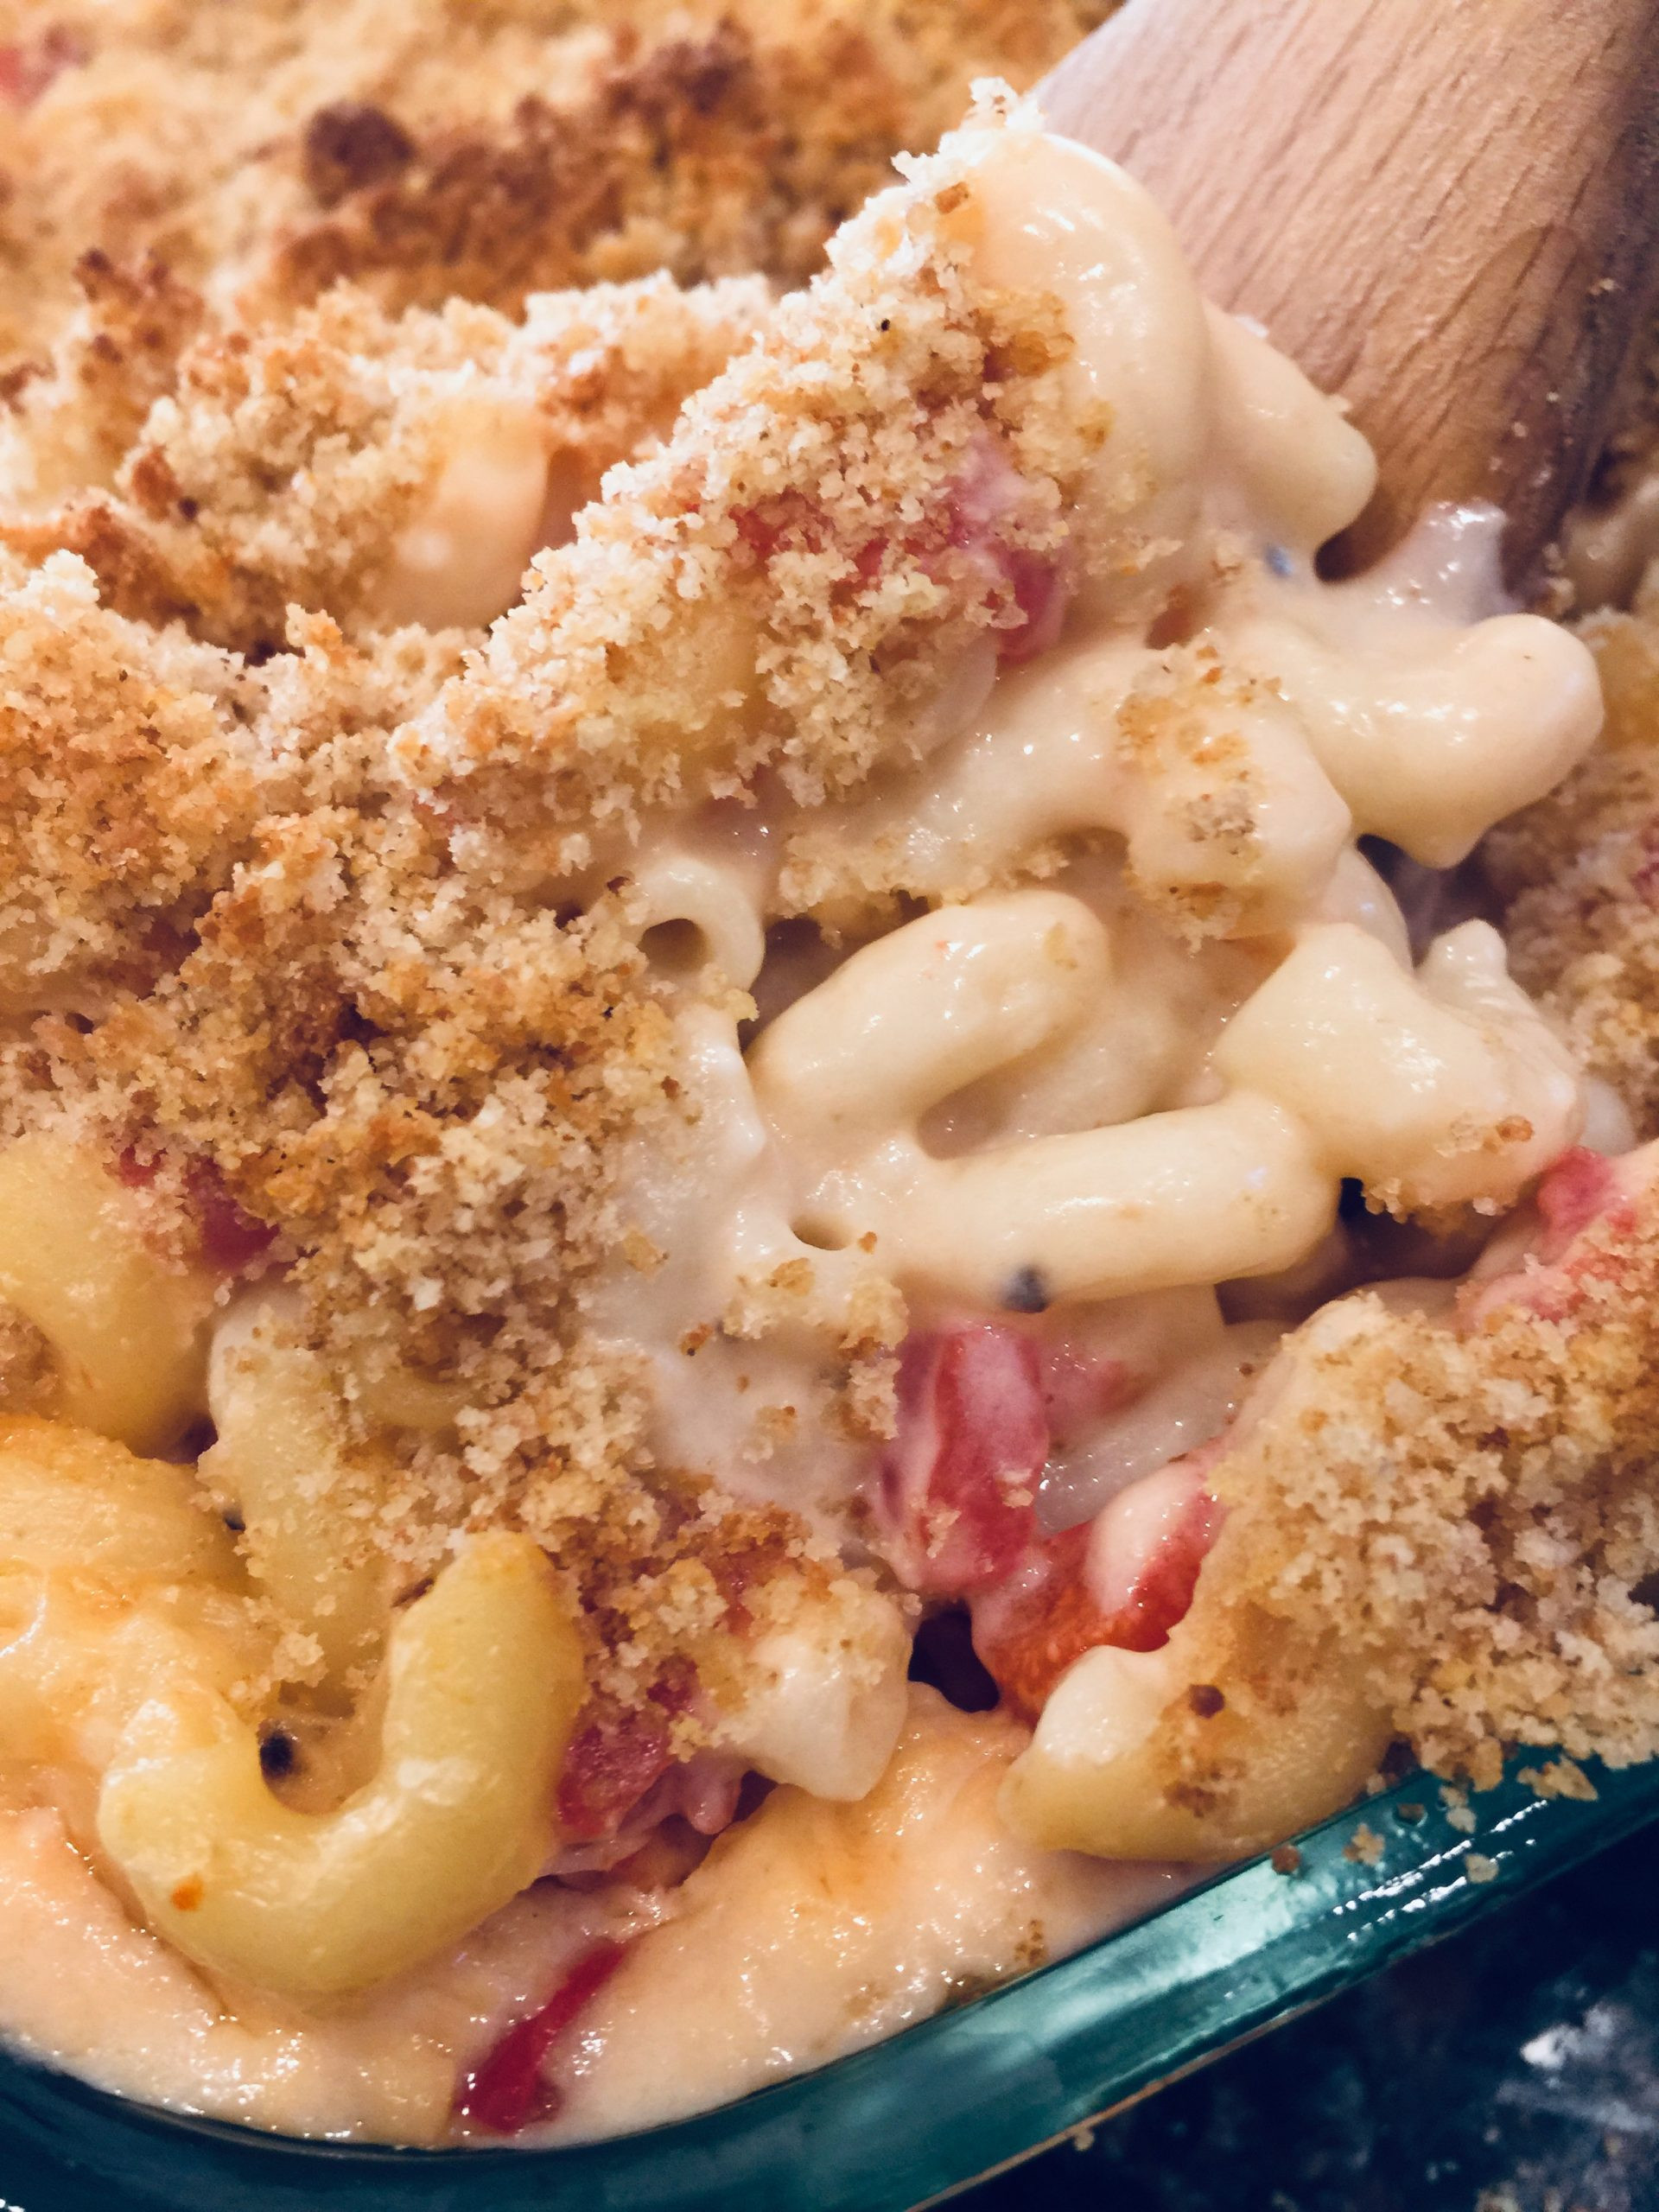 Baked Macaroni And Cheese With Tomatoes And Breadcrumbs
 Baked Macaroni and Tomatoes with Garlic Breadcrumbs